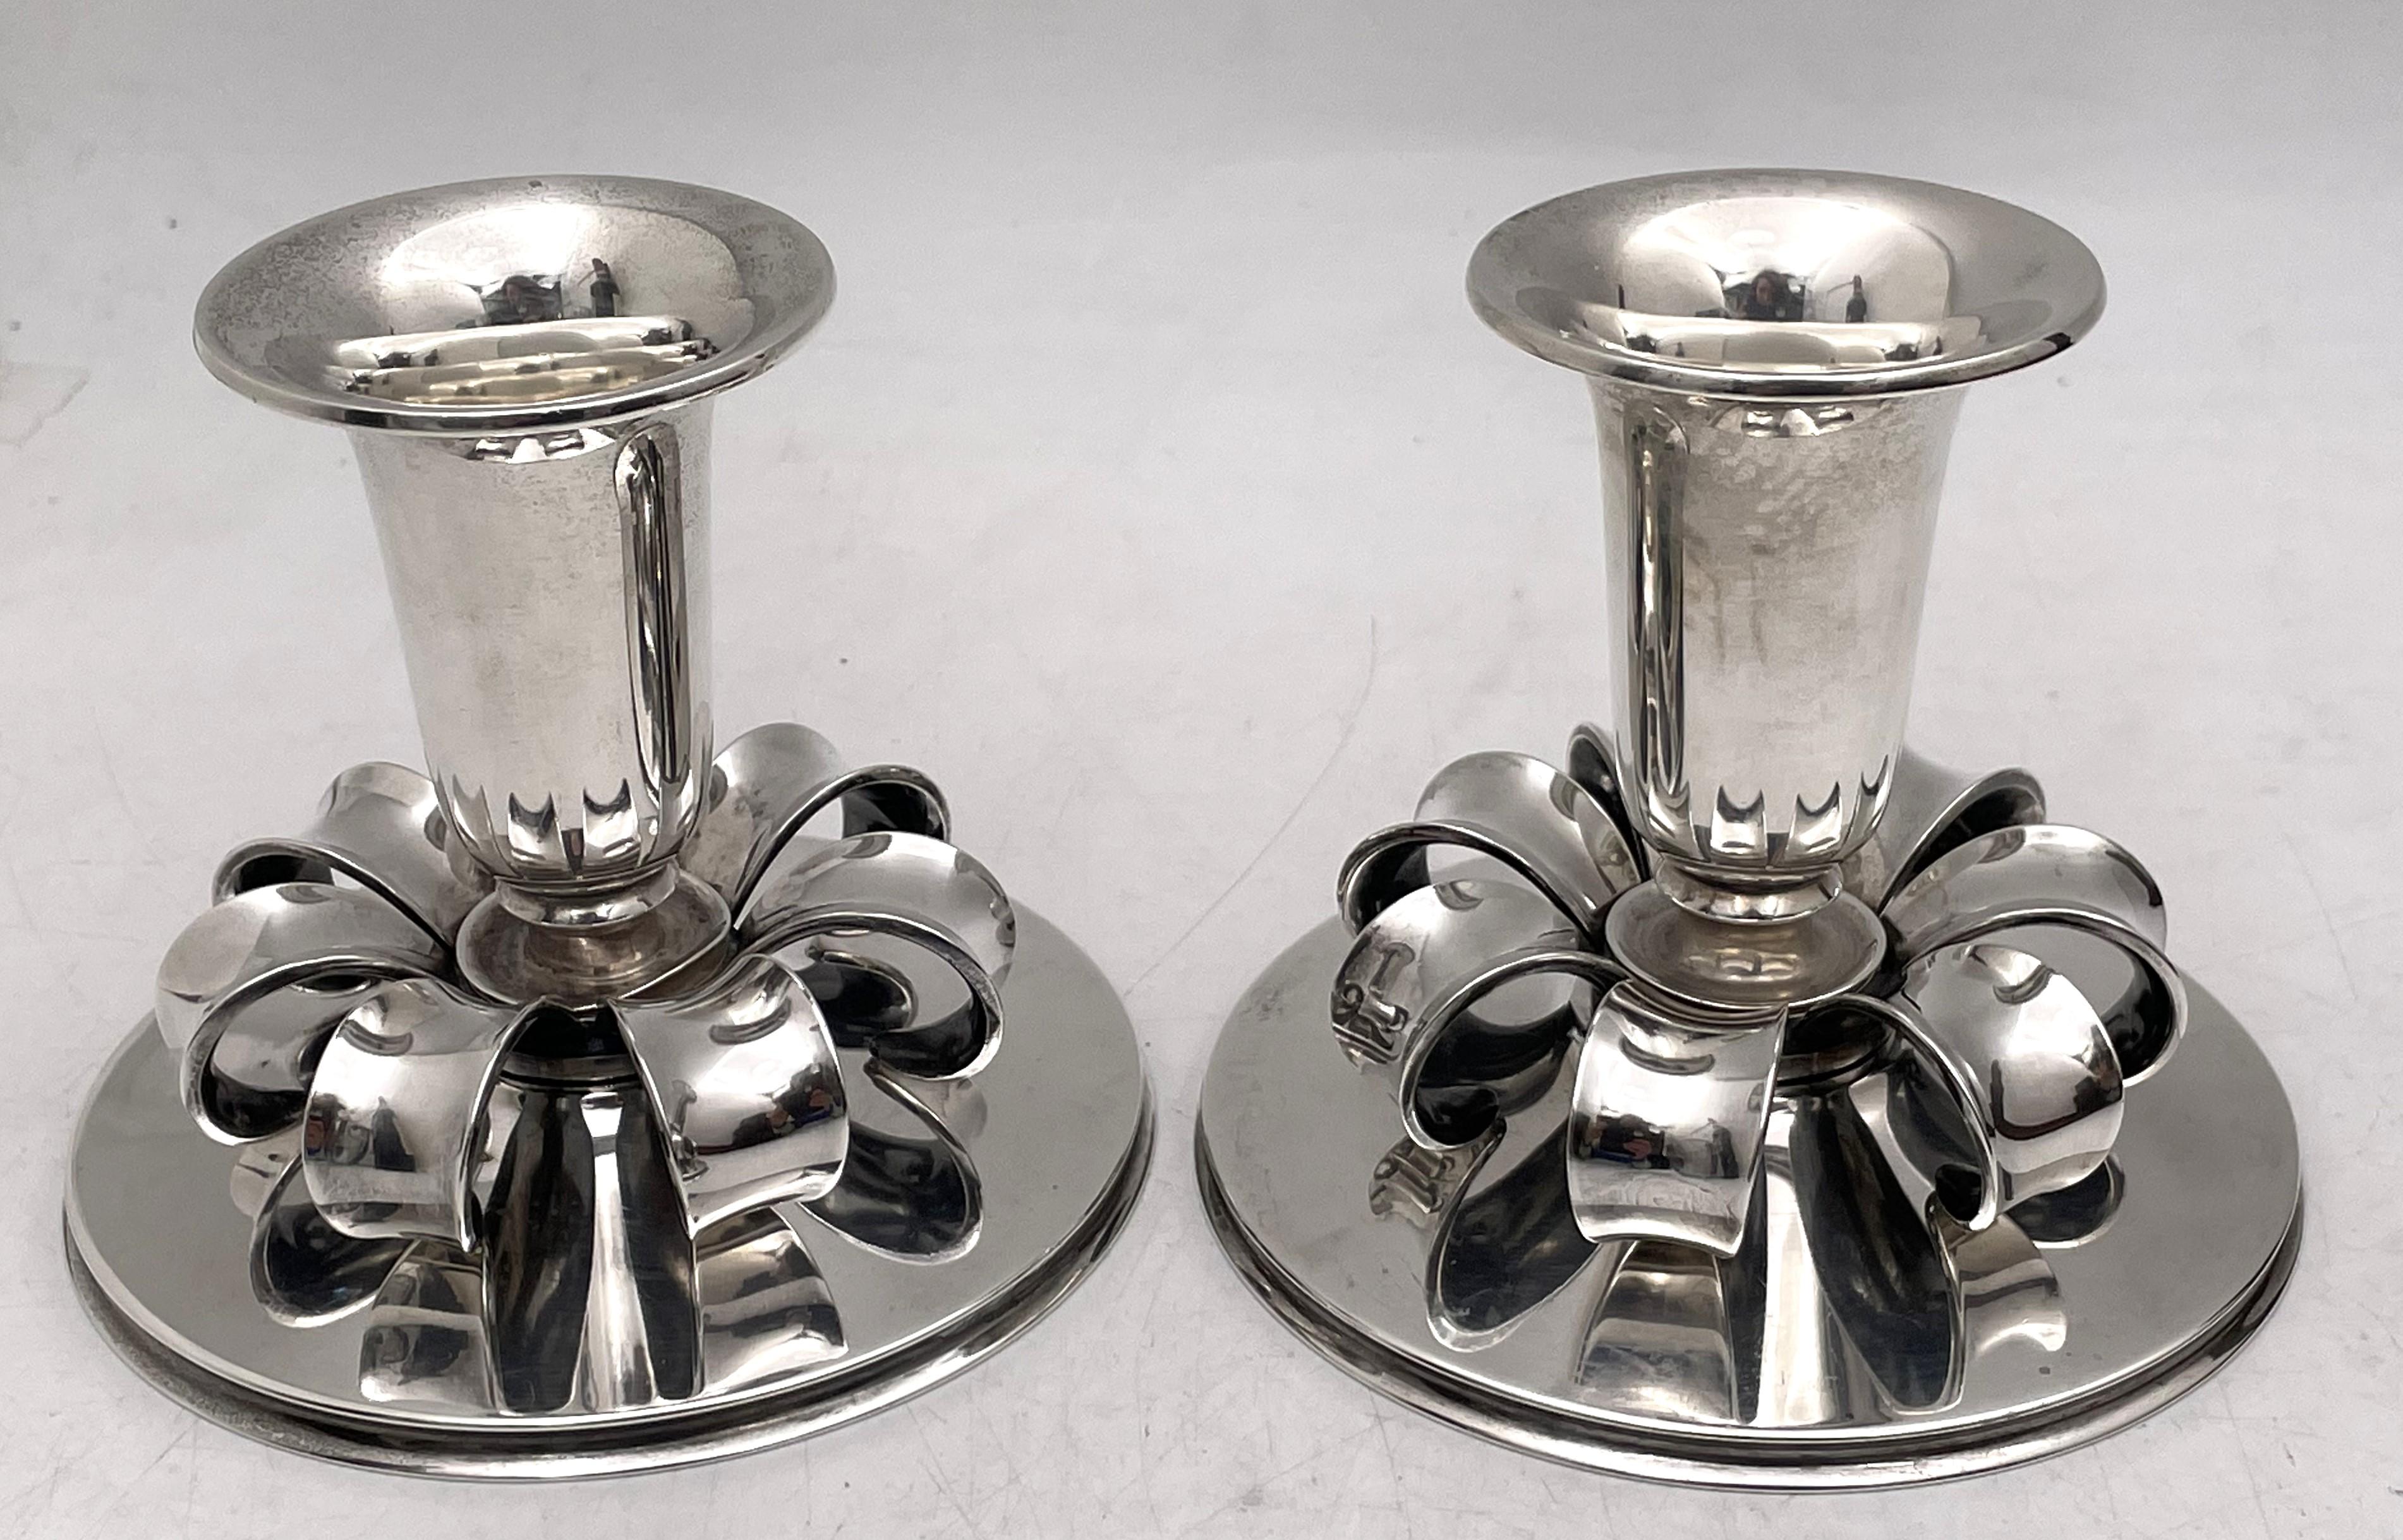 Cohr, Danish pair of sterling silver oil candlesticks in an elegant, geometric, Mid-Century Modern style as well as in a quality and style reminiscent of Georg Jensen. They measure 3 1/3'' in height by 3 7/8'' in diameter at the base and bear